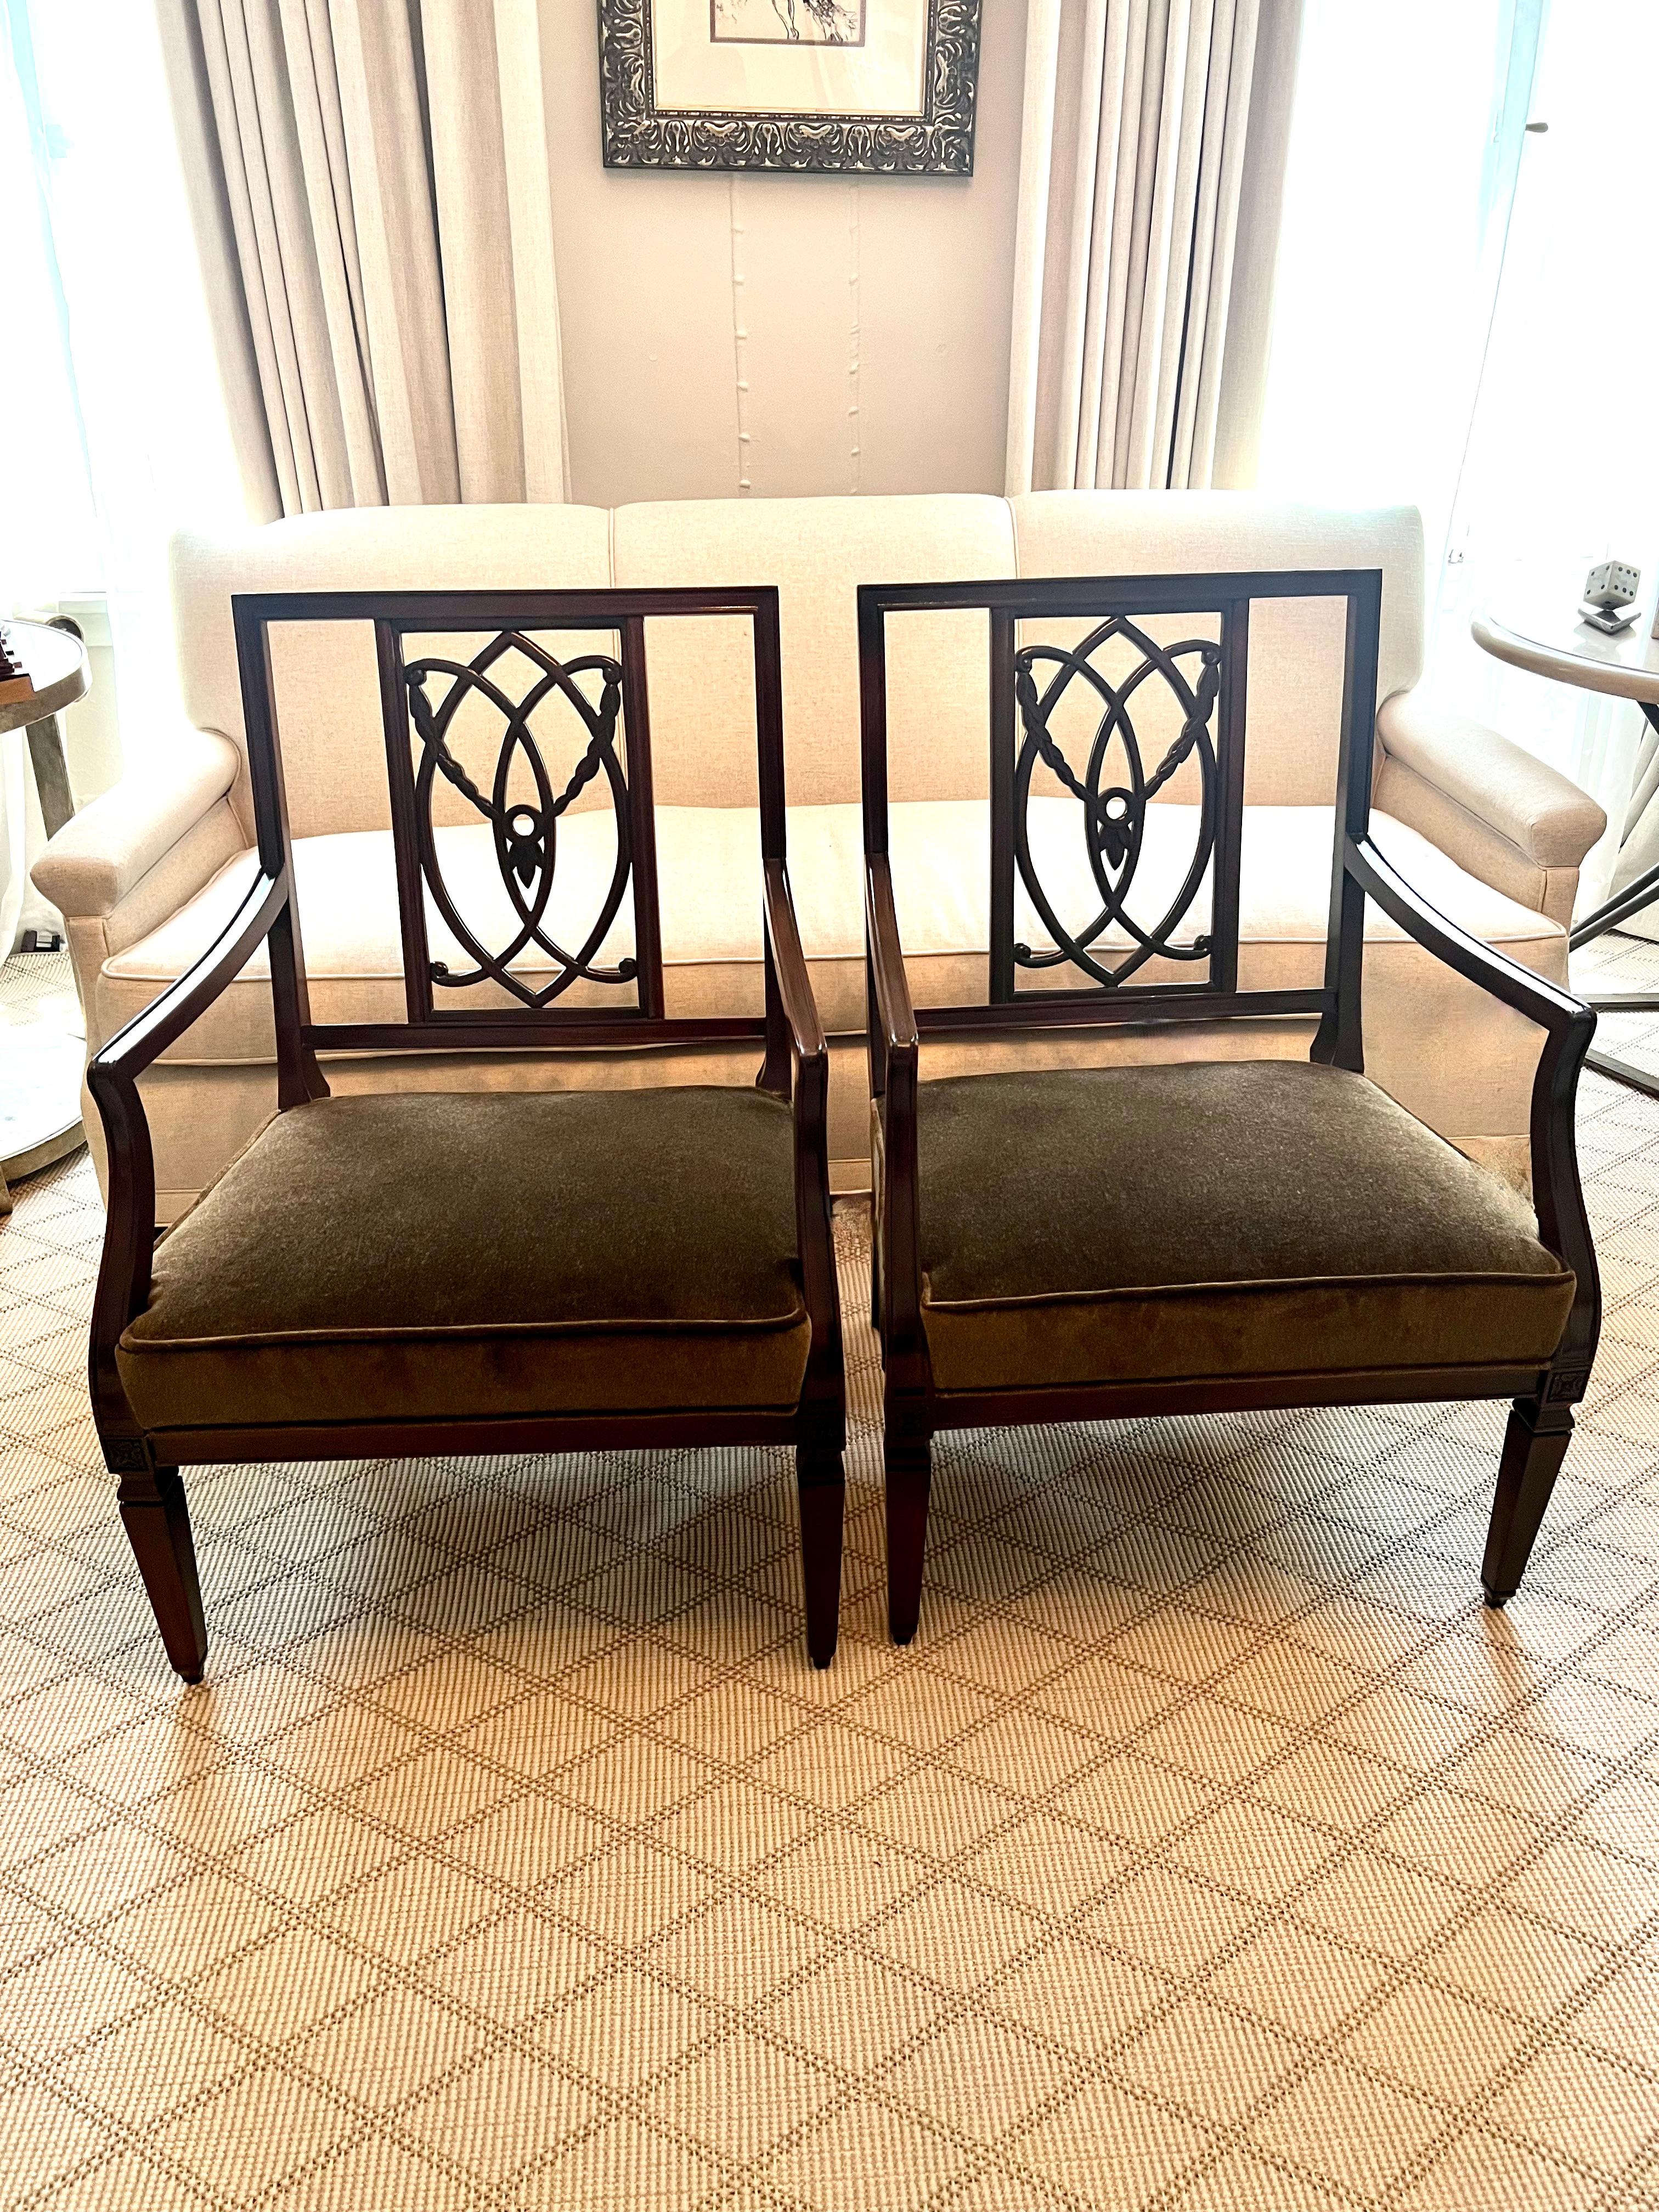 Pair of Hollywood Regency or George lll Walnut Chairs in Mohair In Good Condition For Sale In Los Angeles, CA